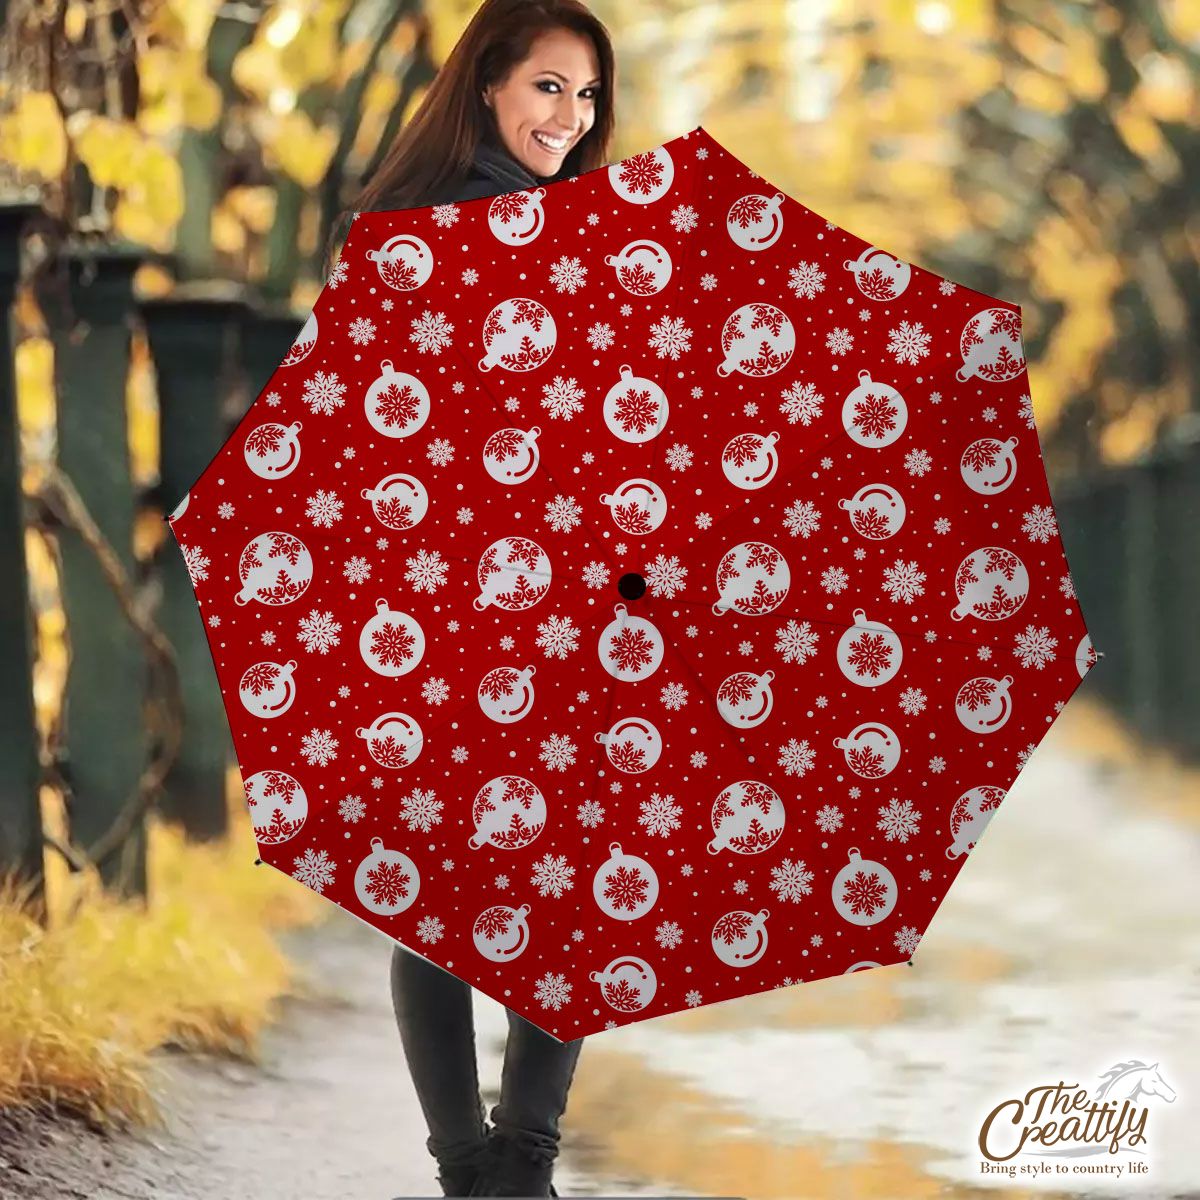 Red And White Christmas Balls On The Snowflake Background Umbrella